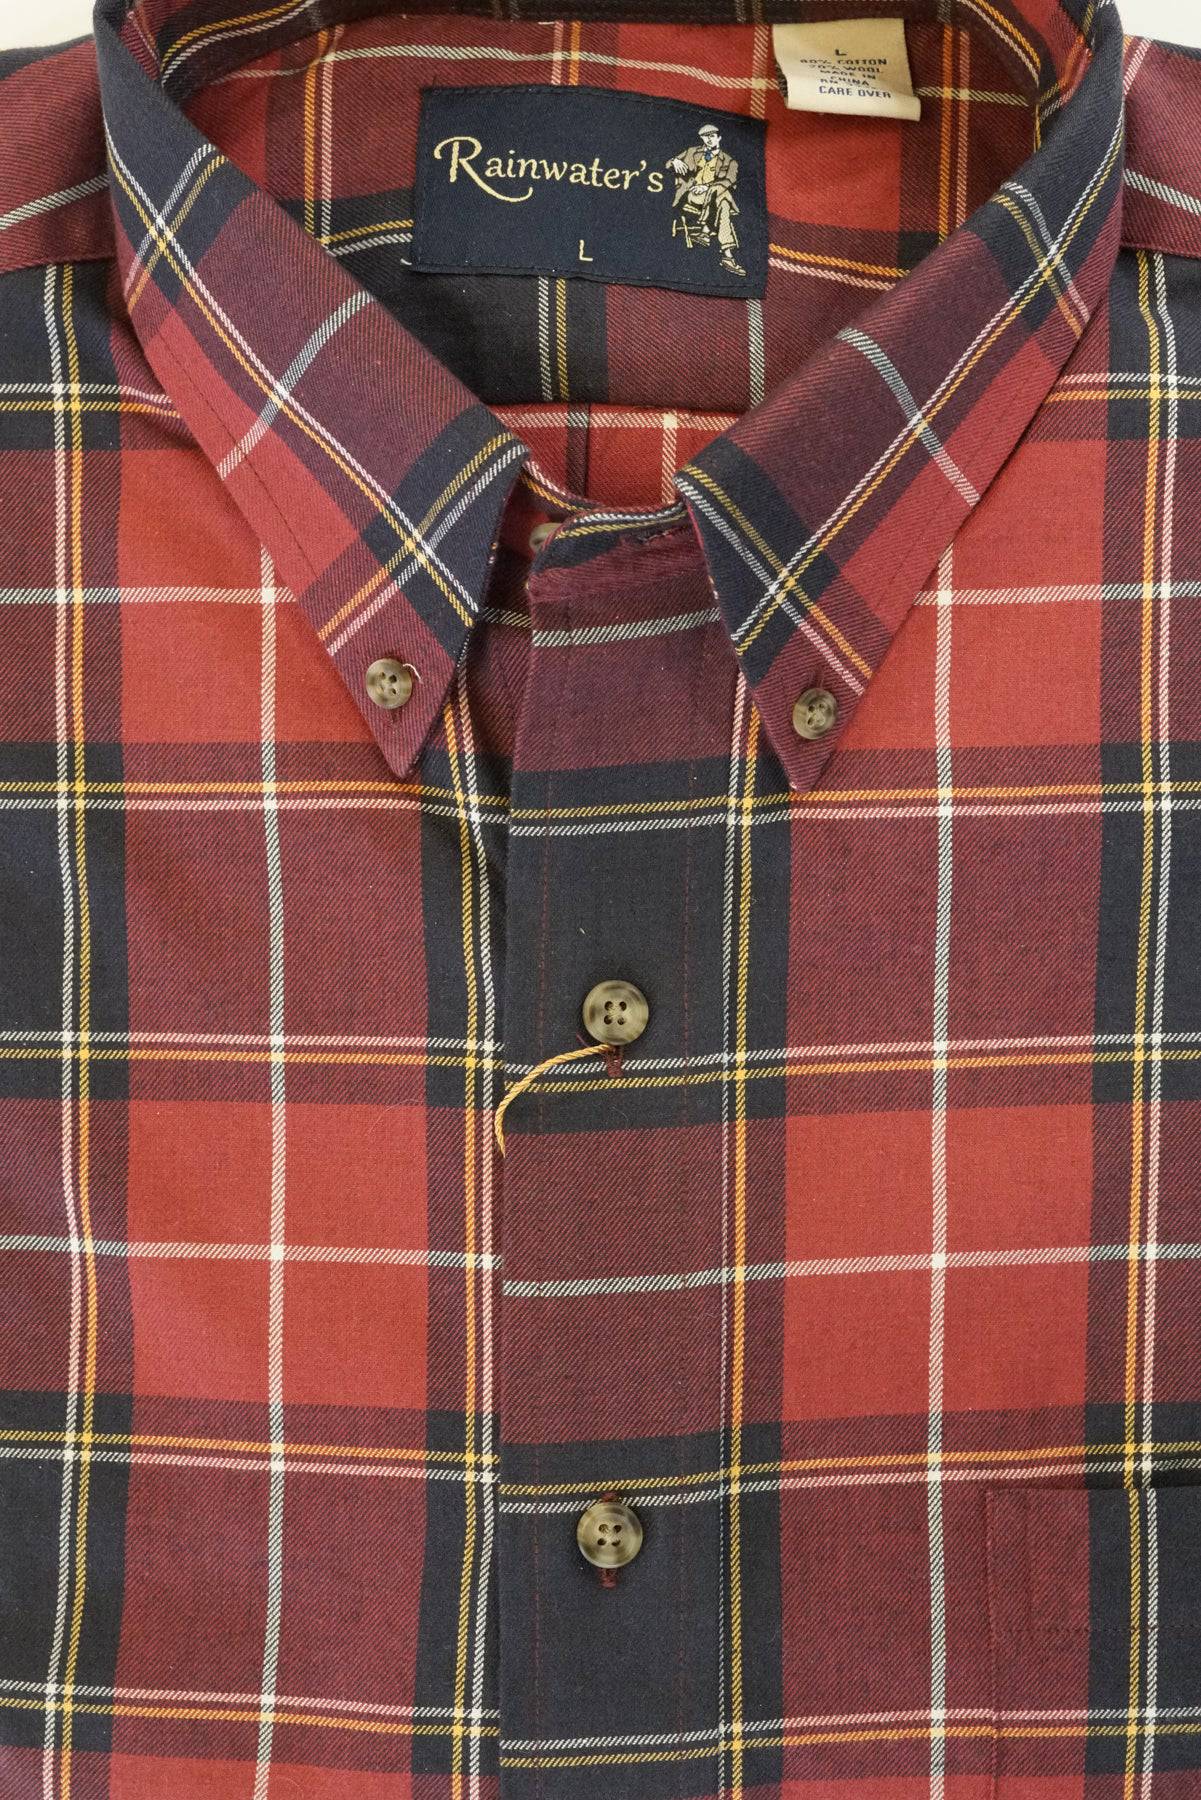 Deep Red and Navy Plaid Button Down in Cotton & Wool by Rainwater's - Rainwater's Men's Clothing and Tuxedo Rental